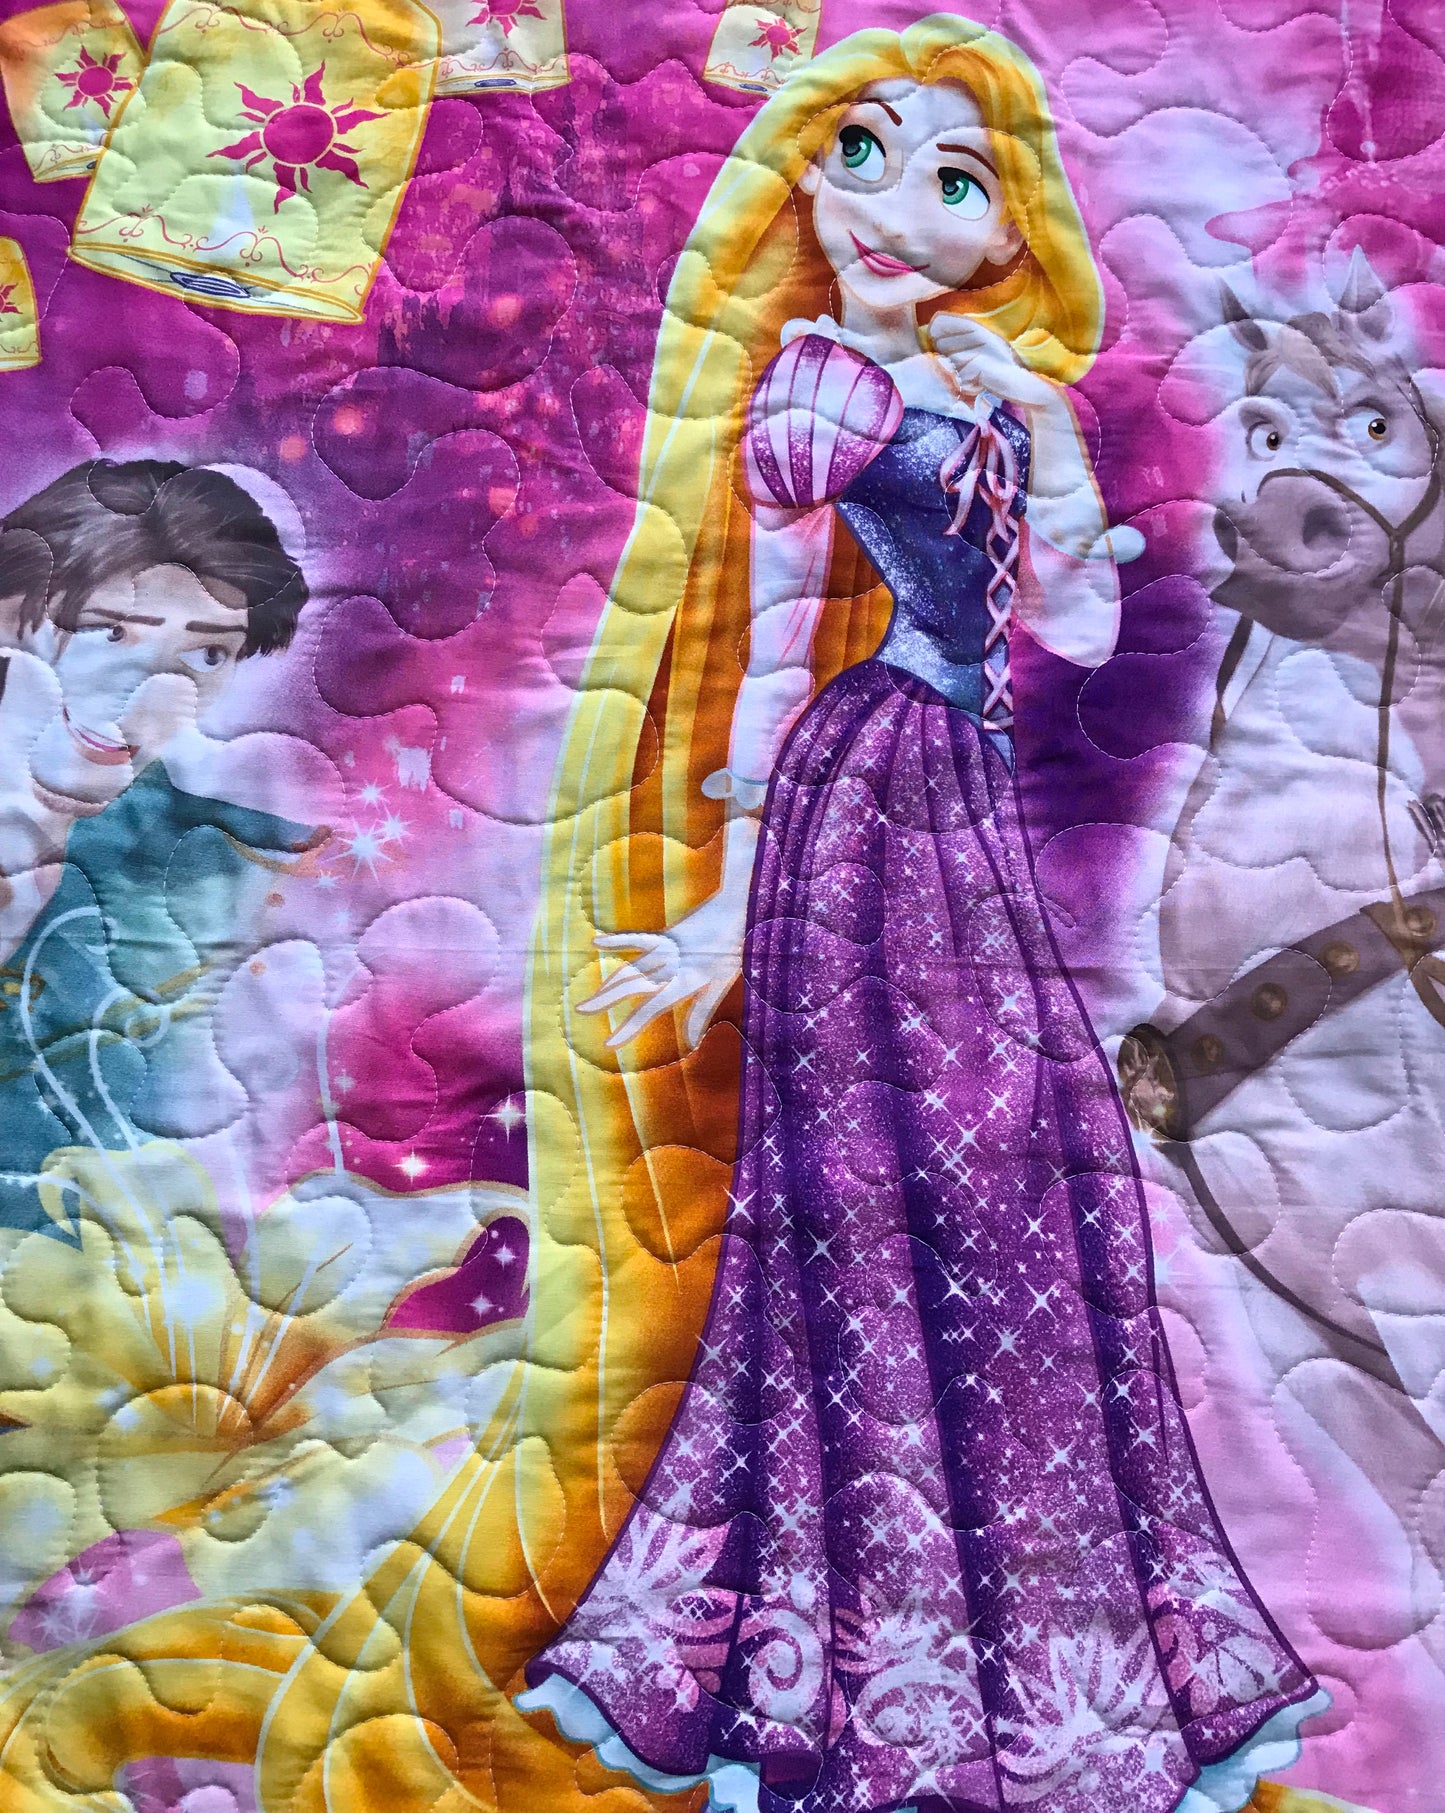 RAPUNZEL TANGLED Inspired Baby Child Quilted Blanket Baby Nursery Child Toddler Bedding with shimmery glitter backing